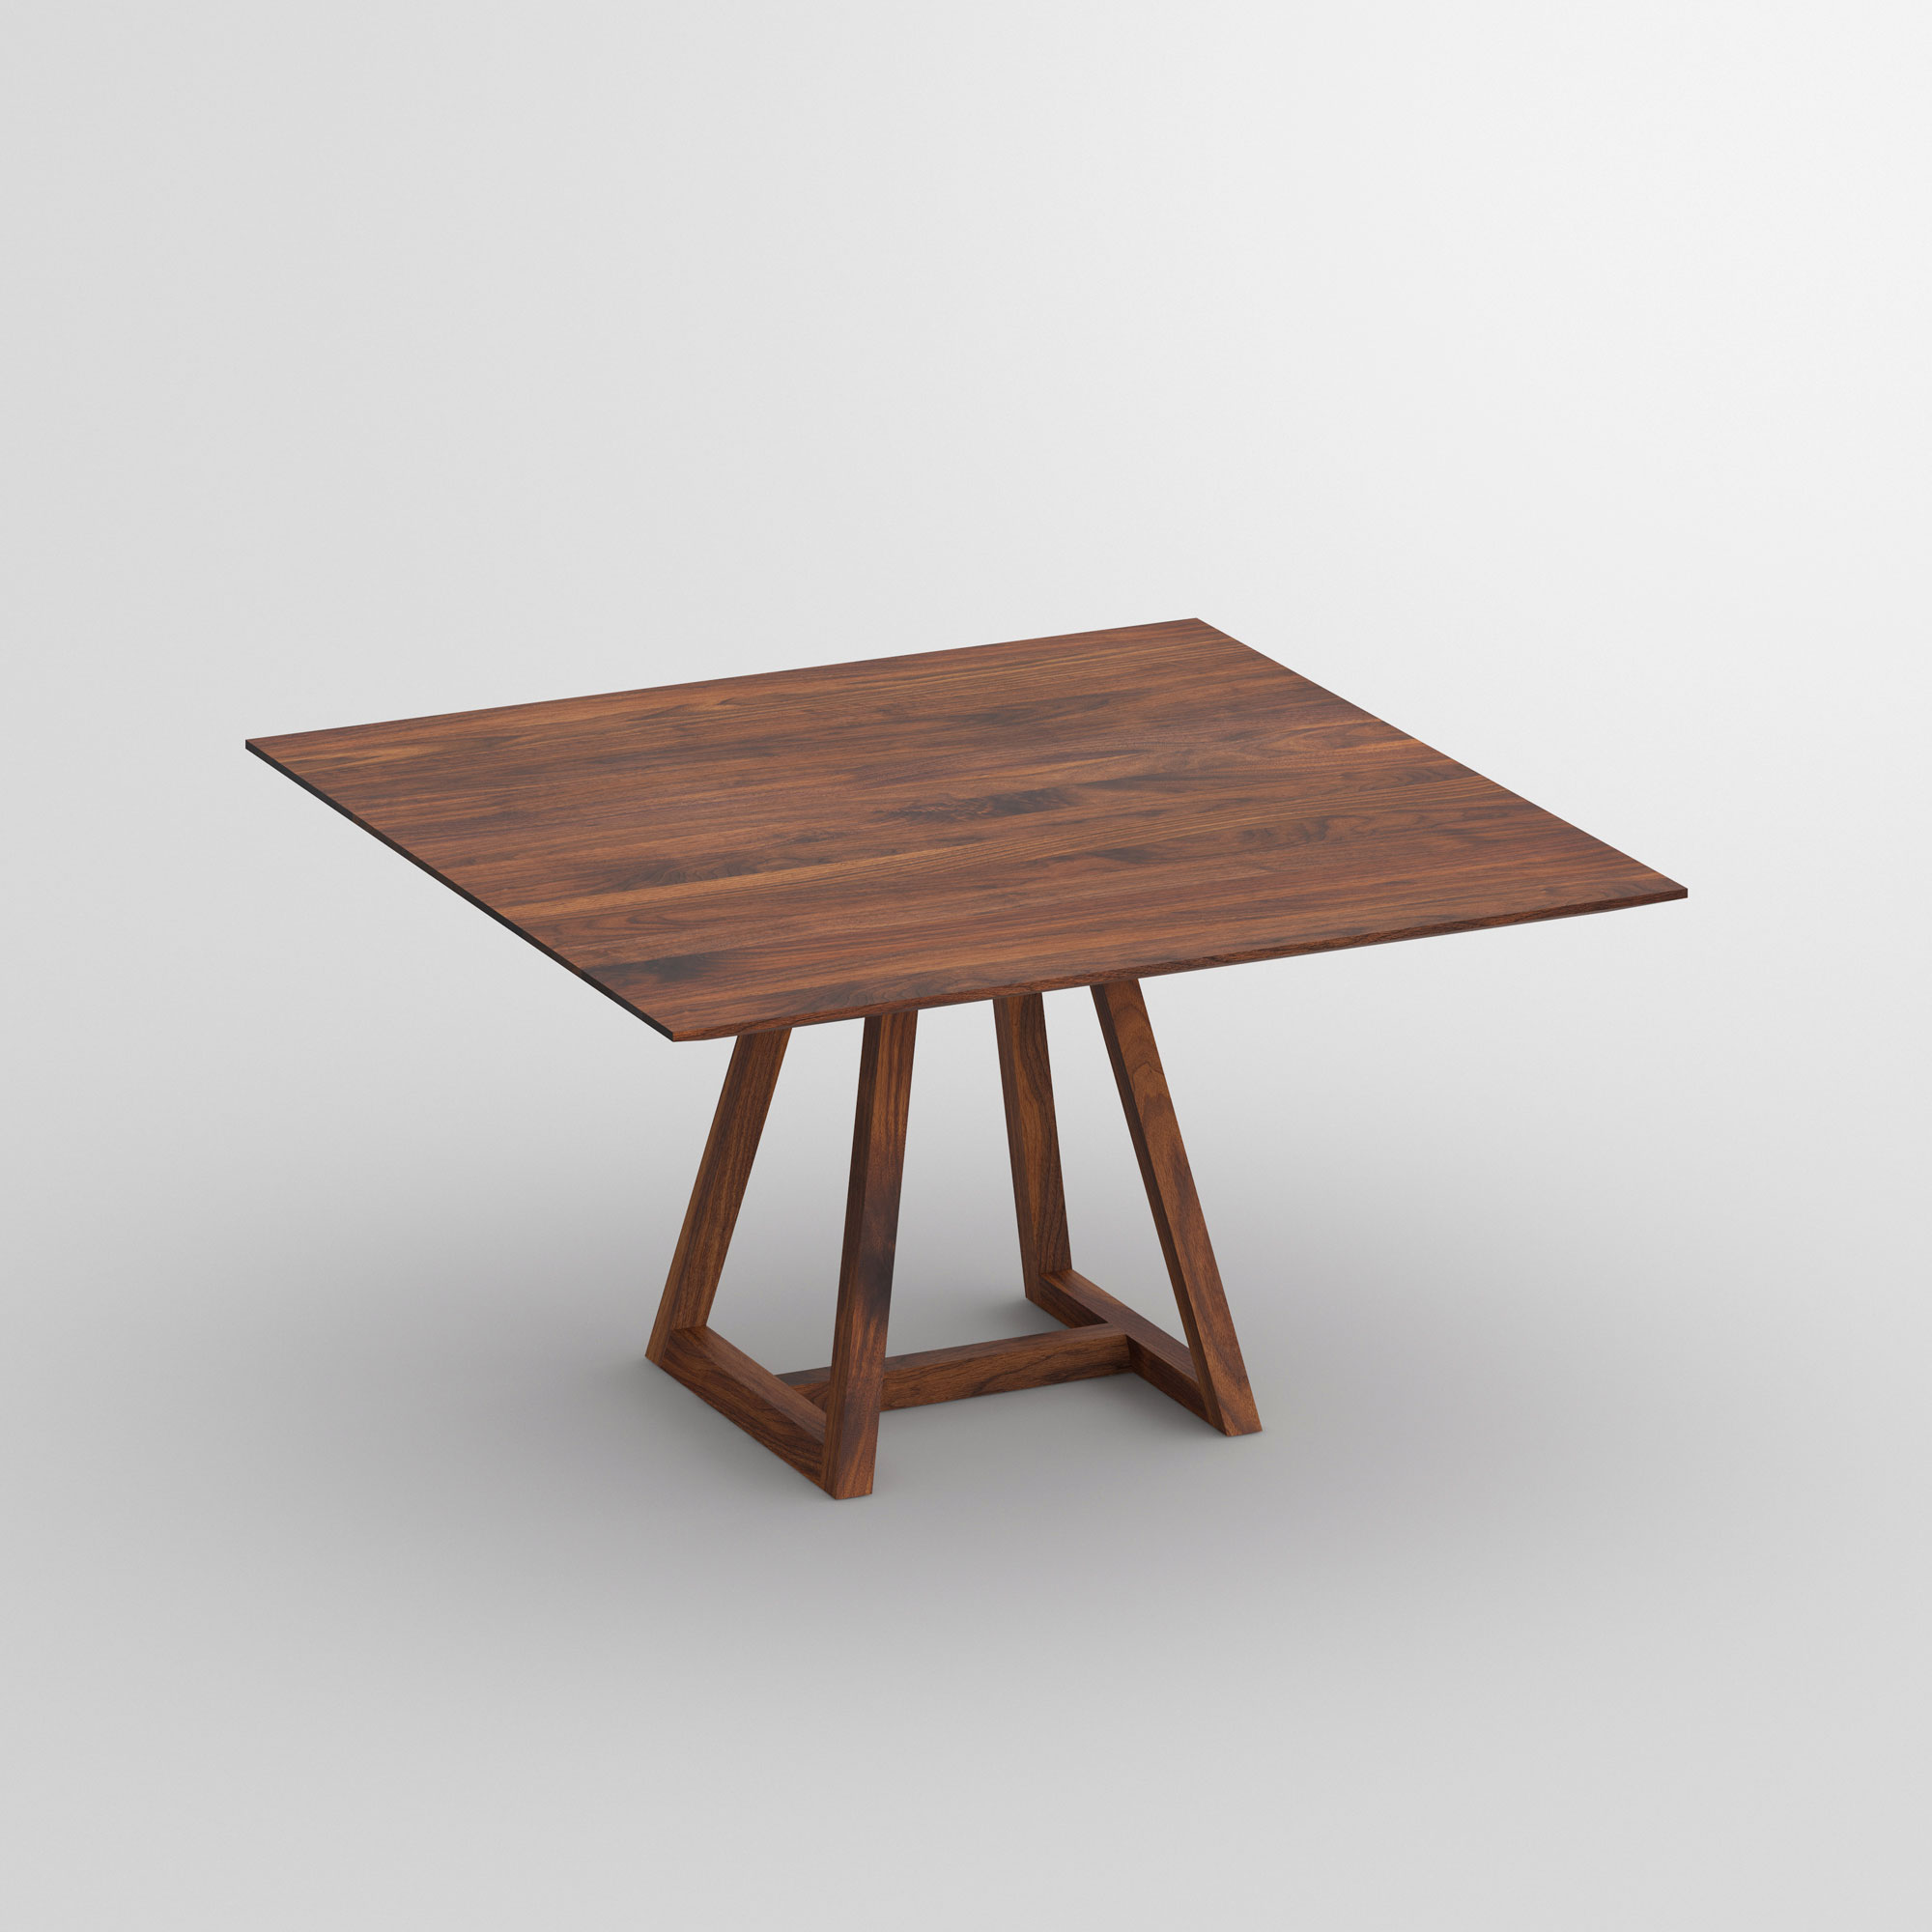 Square Table MARGO SQUARE cam1 custom made in solid wood by vitamin design